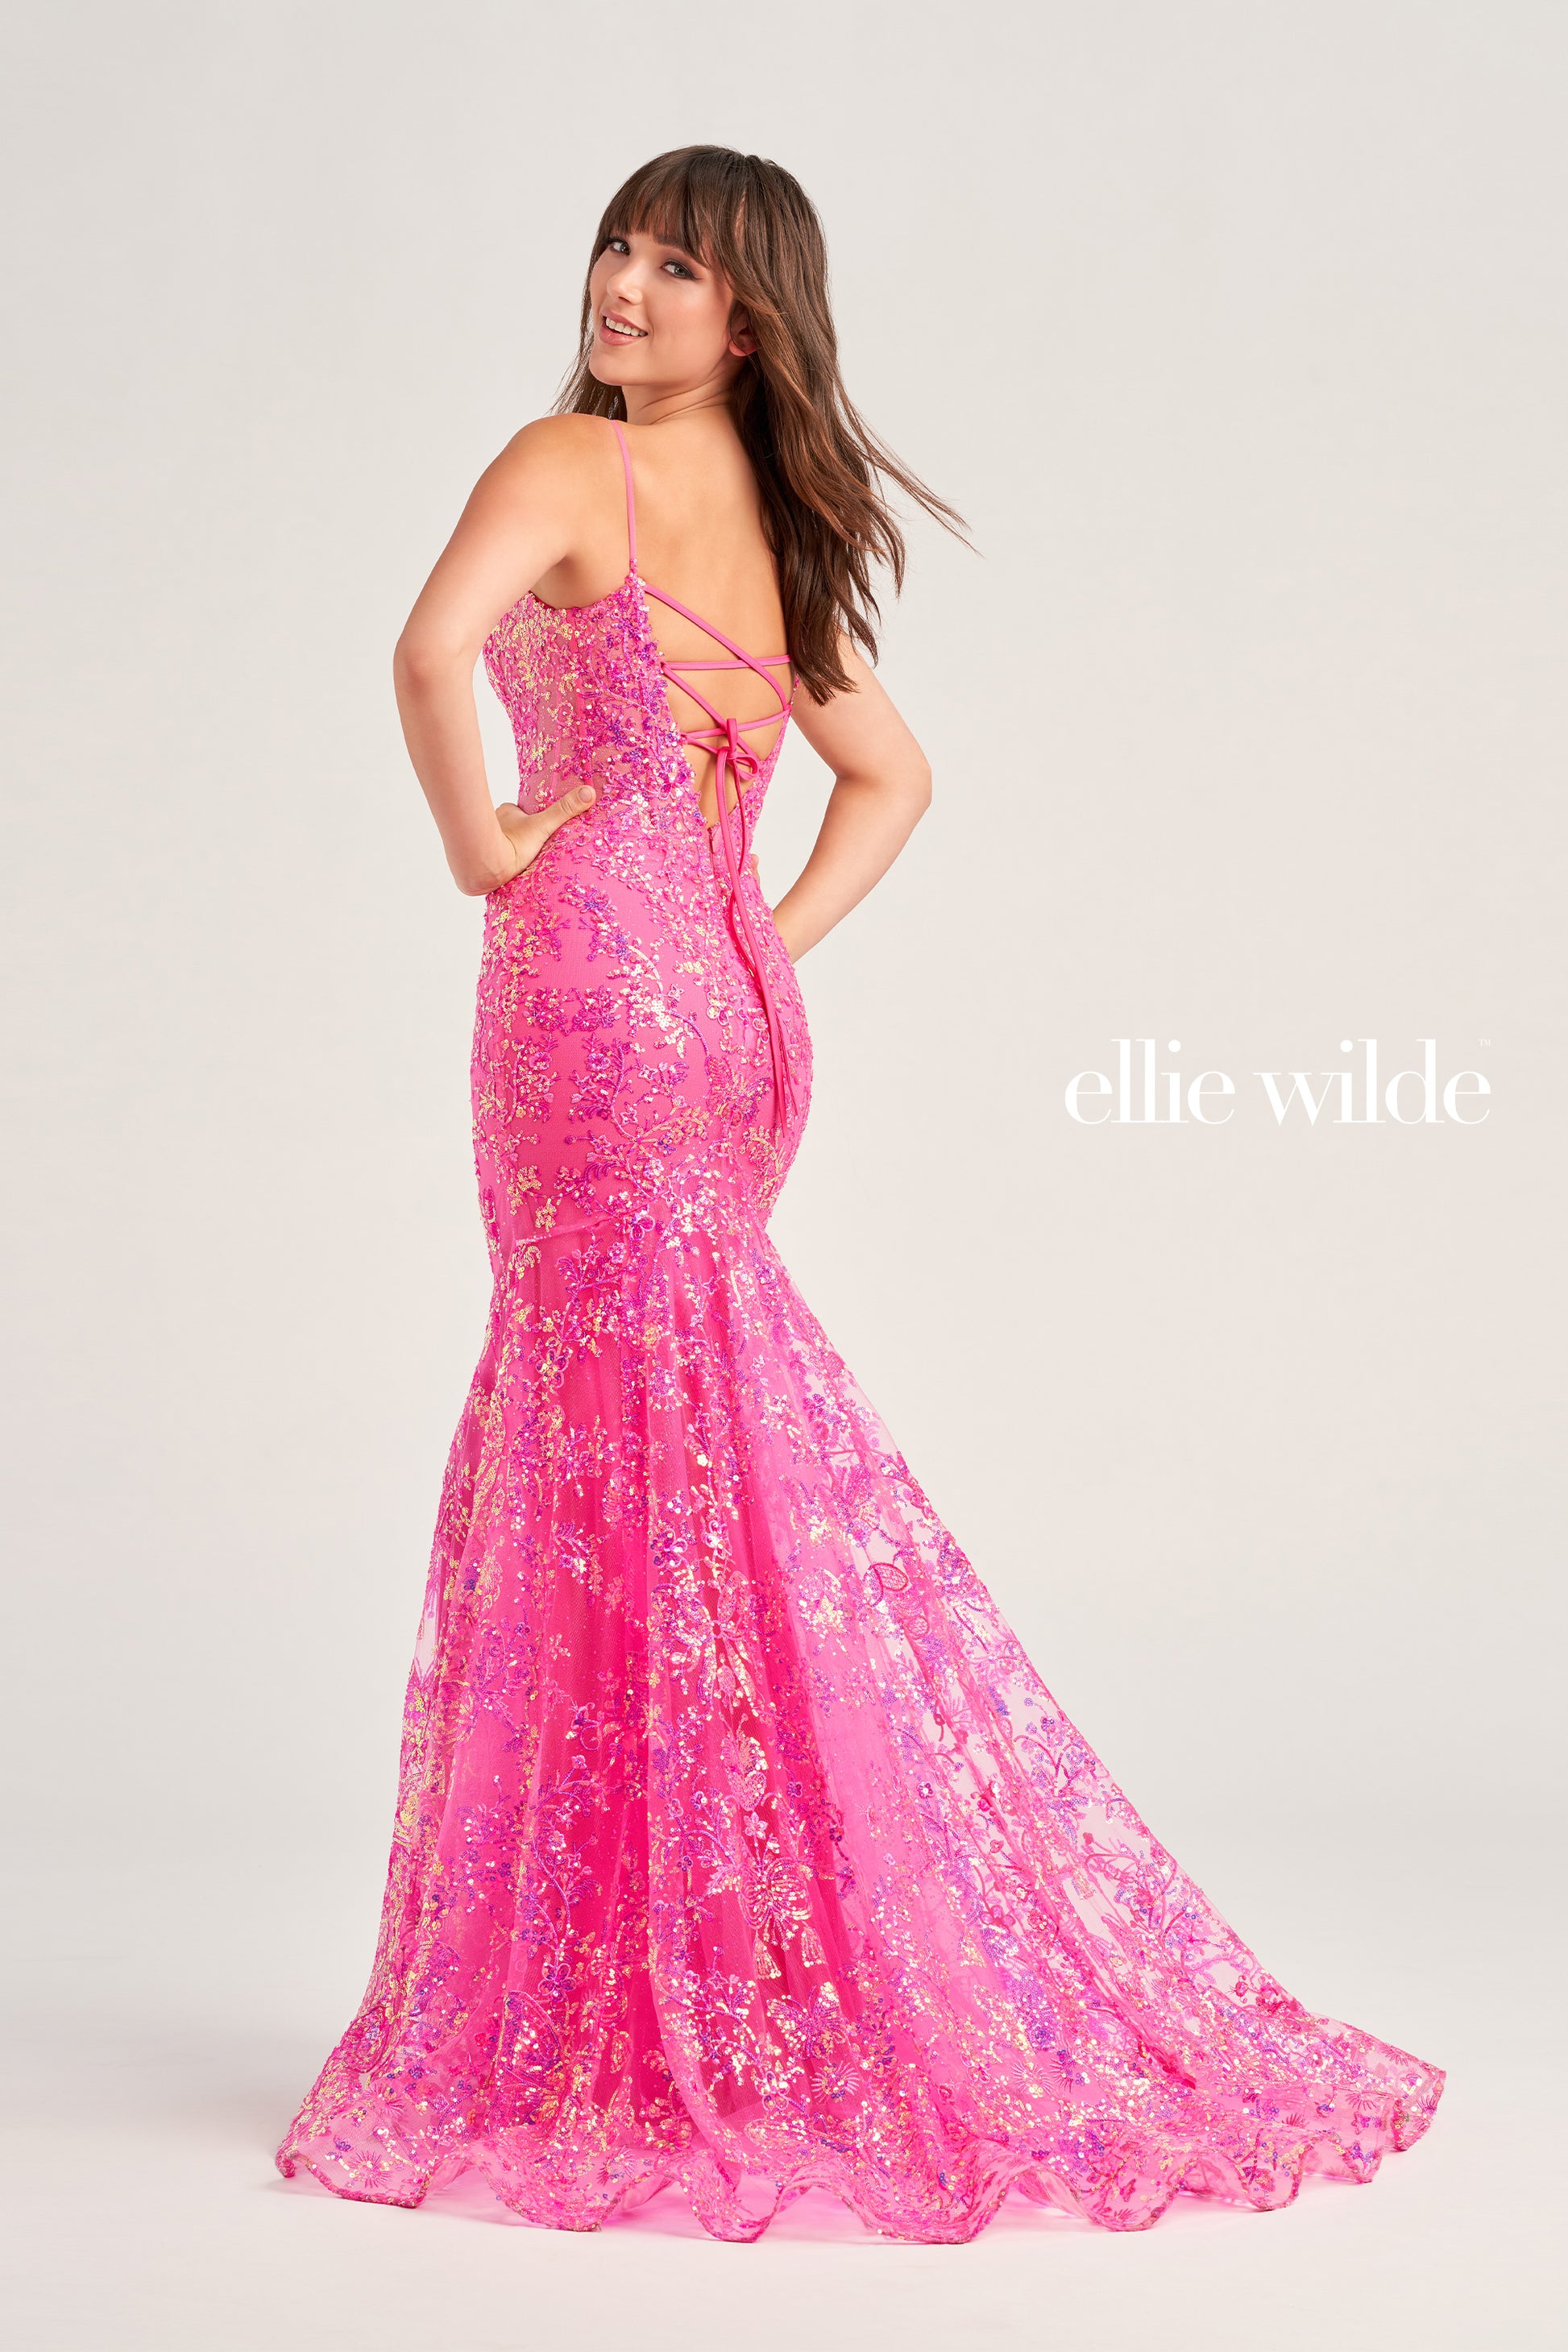 Make a stunning appearance at your next formal event in this Ellie Wilde EW35013 Long Fitted Sequin Mermaid Prom Dress. Crafted from an exquisite combination of Embroidered Tulle, Glitter Tulle, and Sequins, this beautiful dress includes a plunging Sweetheart neckline, a corset bodice with a lace-up back, and a trumpet silhouette for the perfect fit. The Natural waistline and Sleeveless design complete the look.  COLOR: BLACK, MIDNIGHT, LIGHT BLUE, LILAC, HOT PINK SIZE: 00 - 20